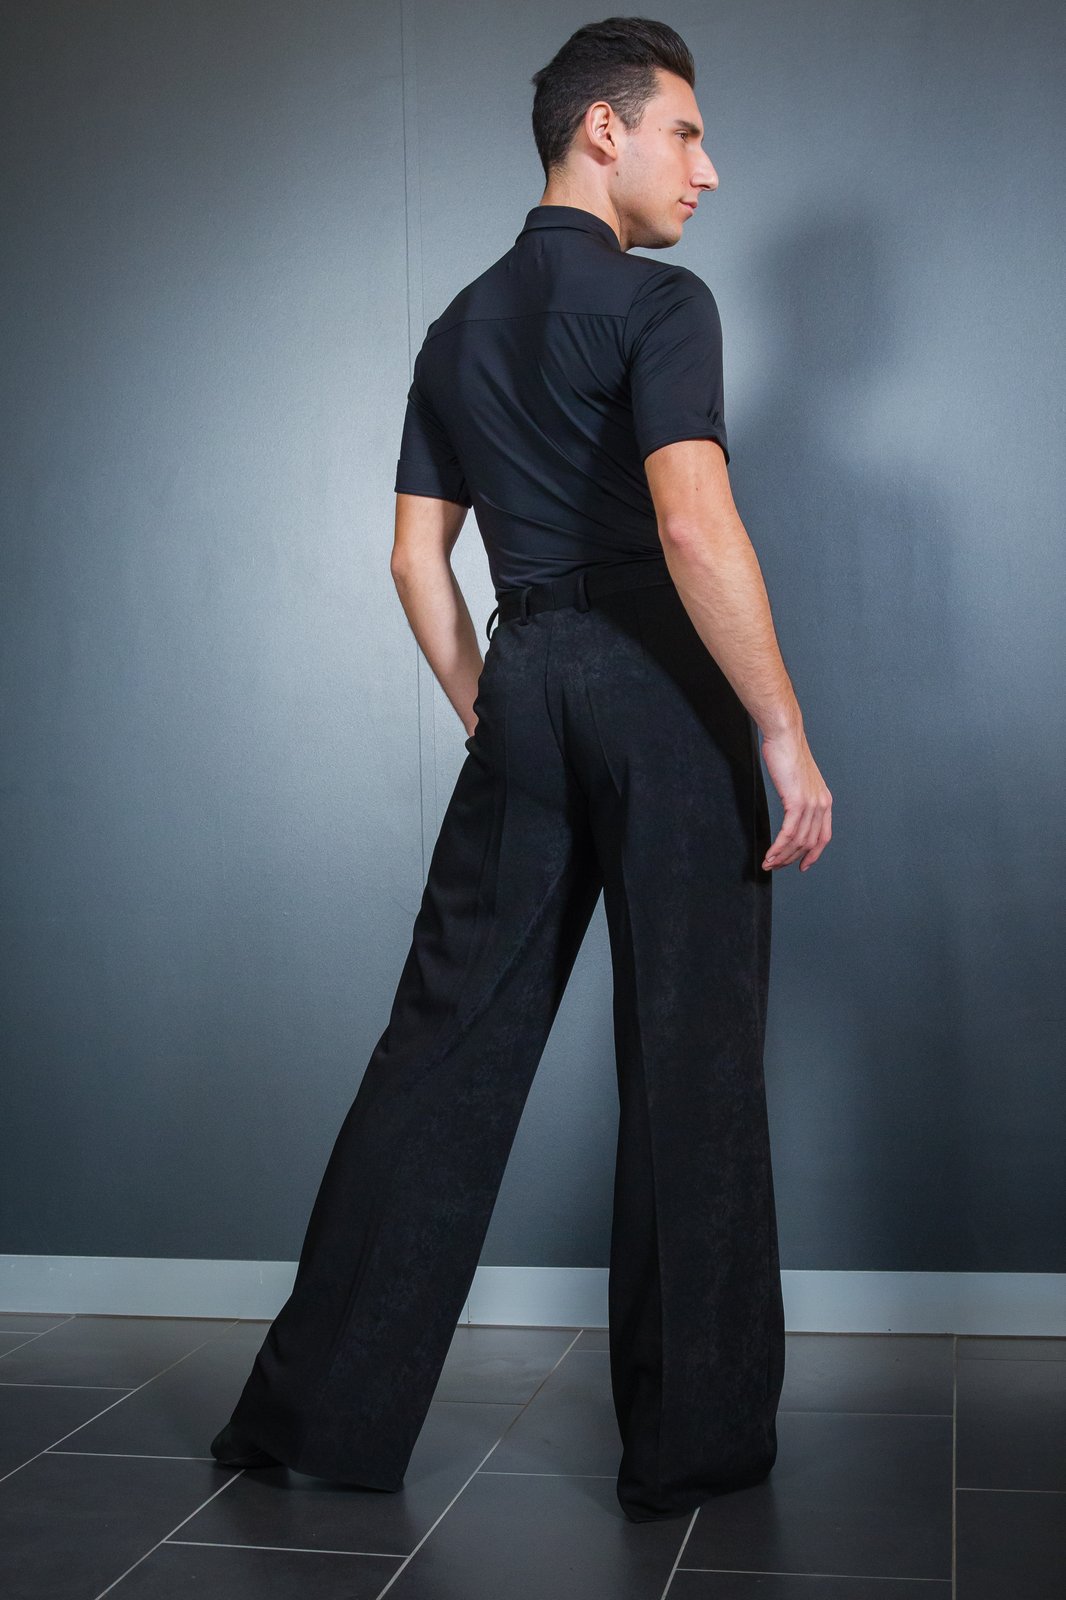 Men's Dance Pants, VEdance, VE Masters, $175.00, from VEdance LLC, The very  best in ballroom and Latin dance shoes and dancewear.